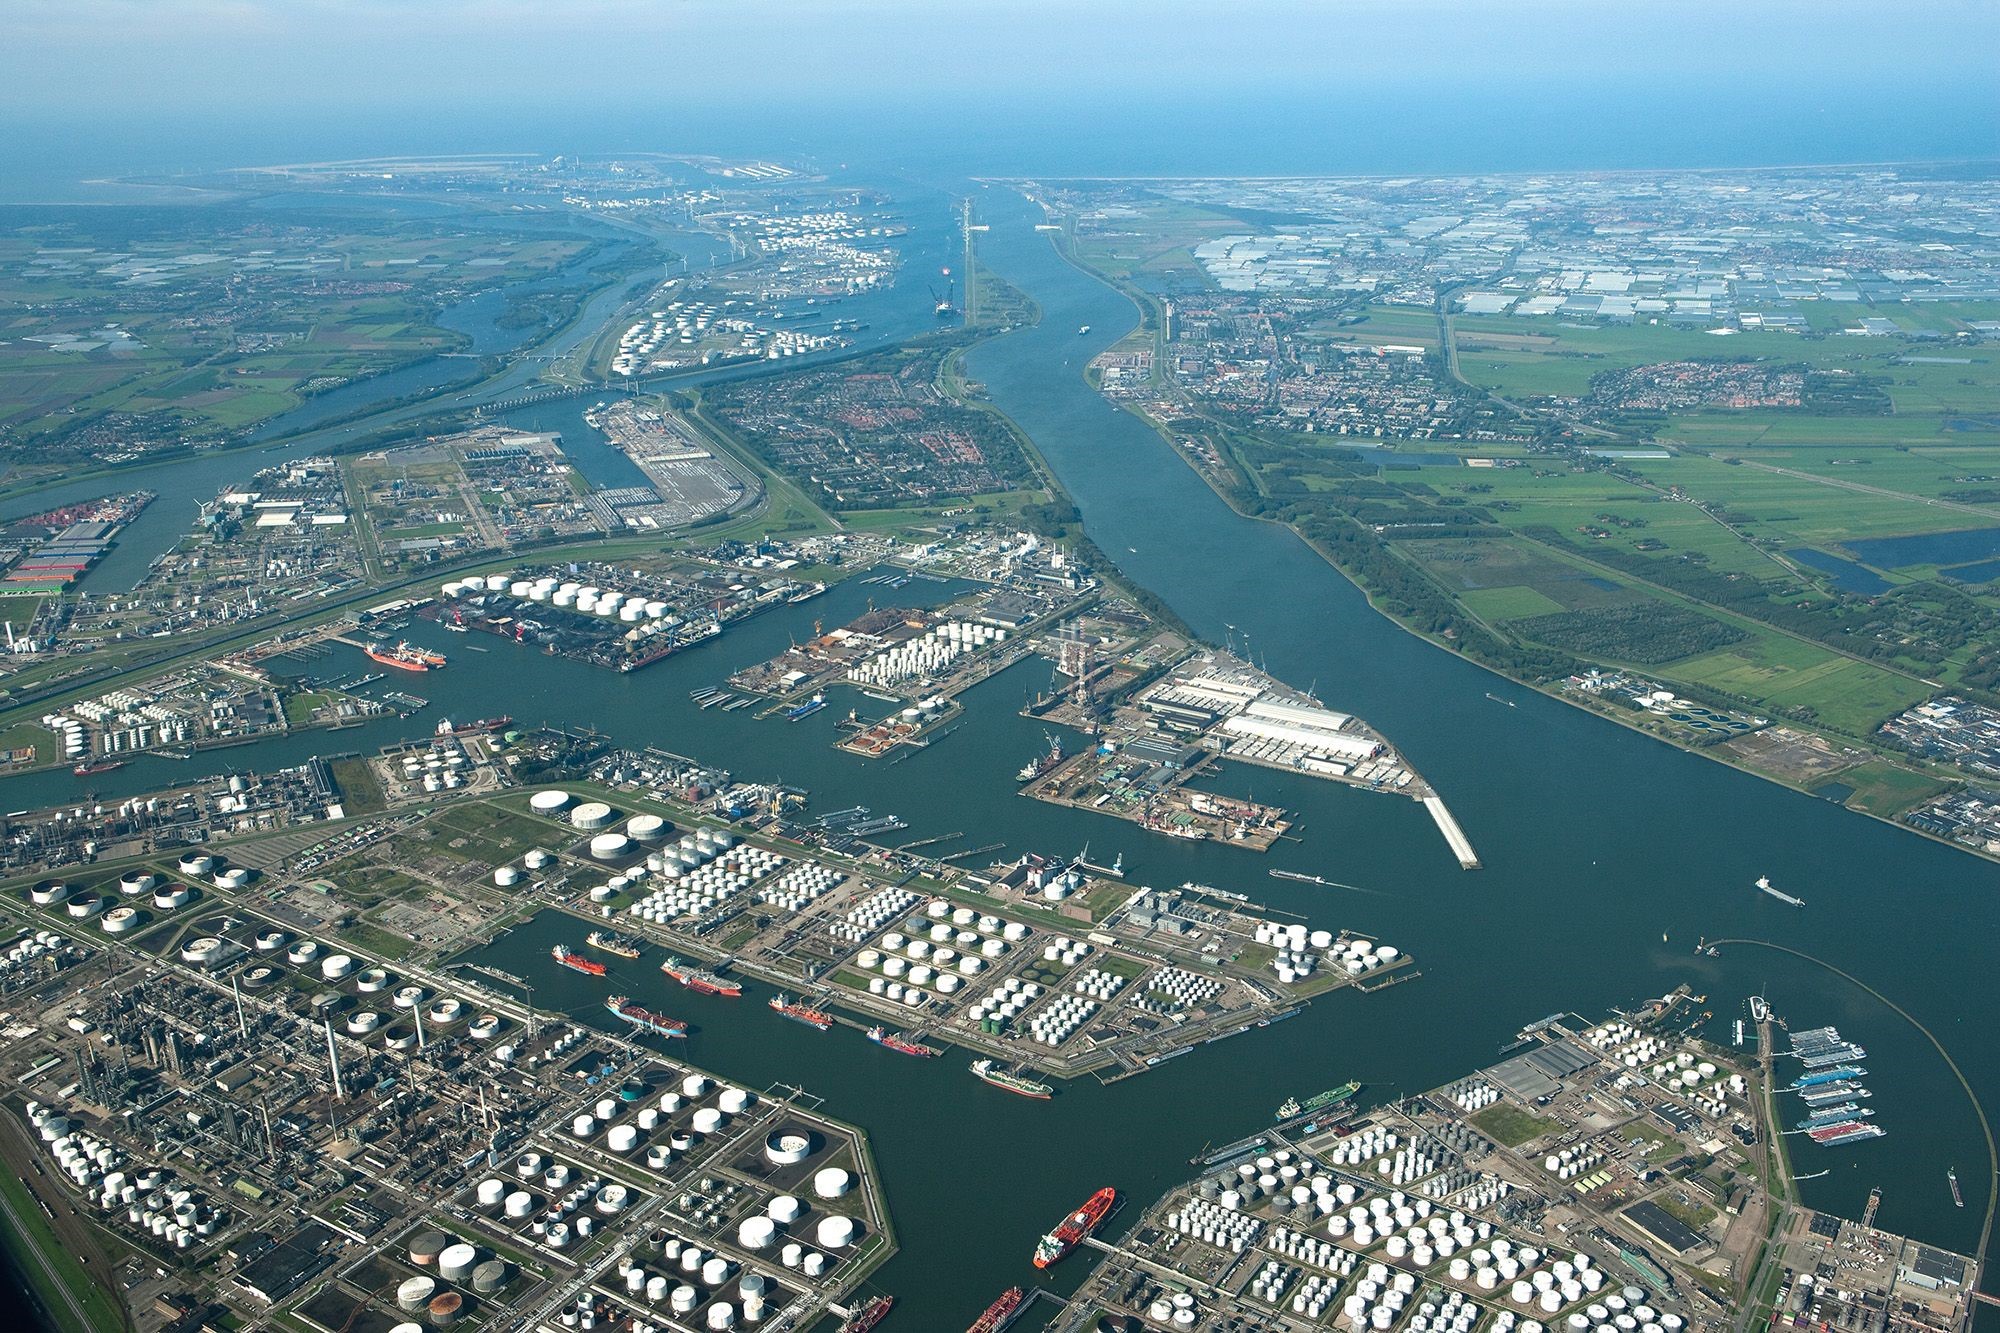 Leading a risk assessment for The Port of Rotterdam - Quattor P